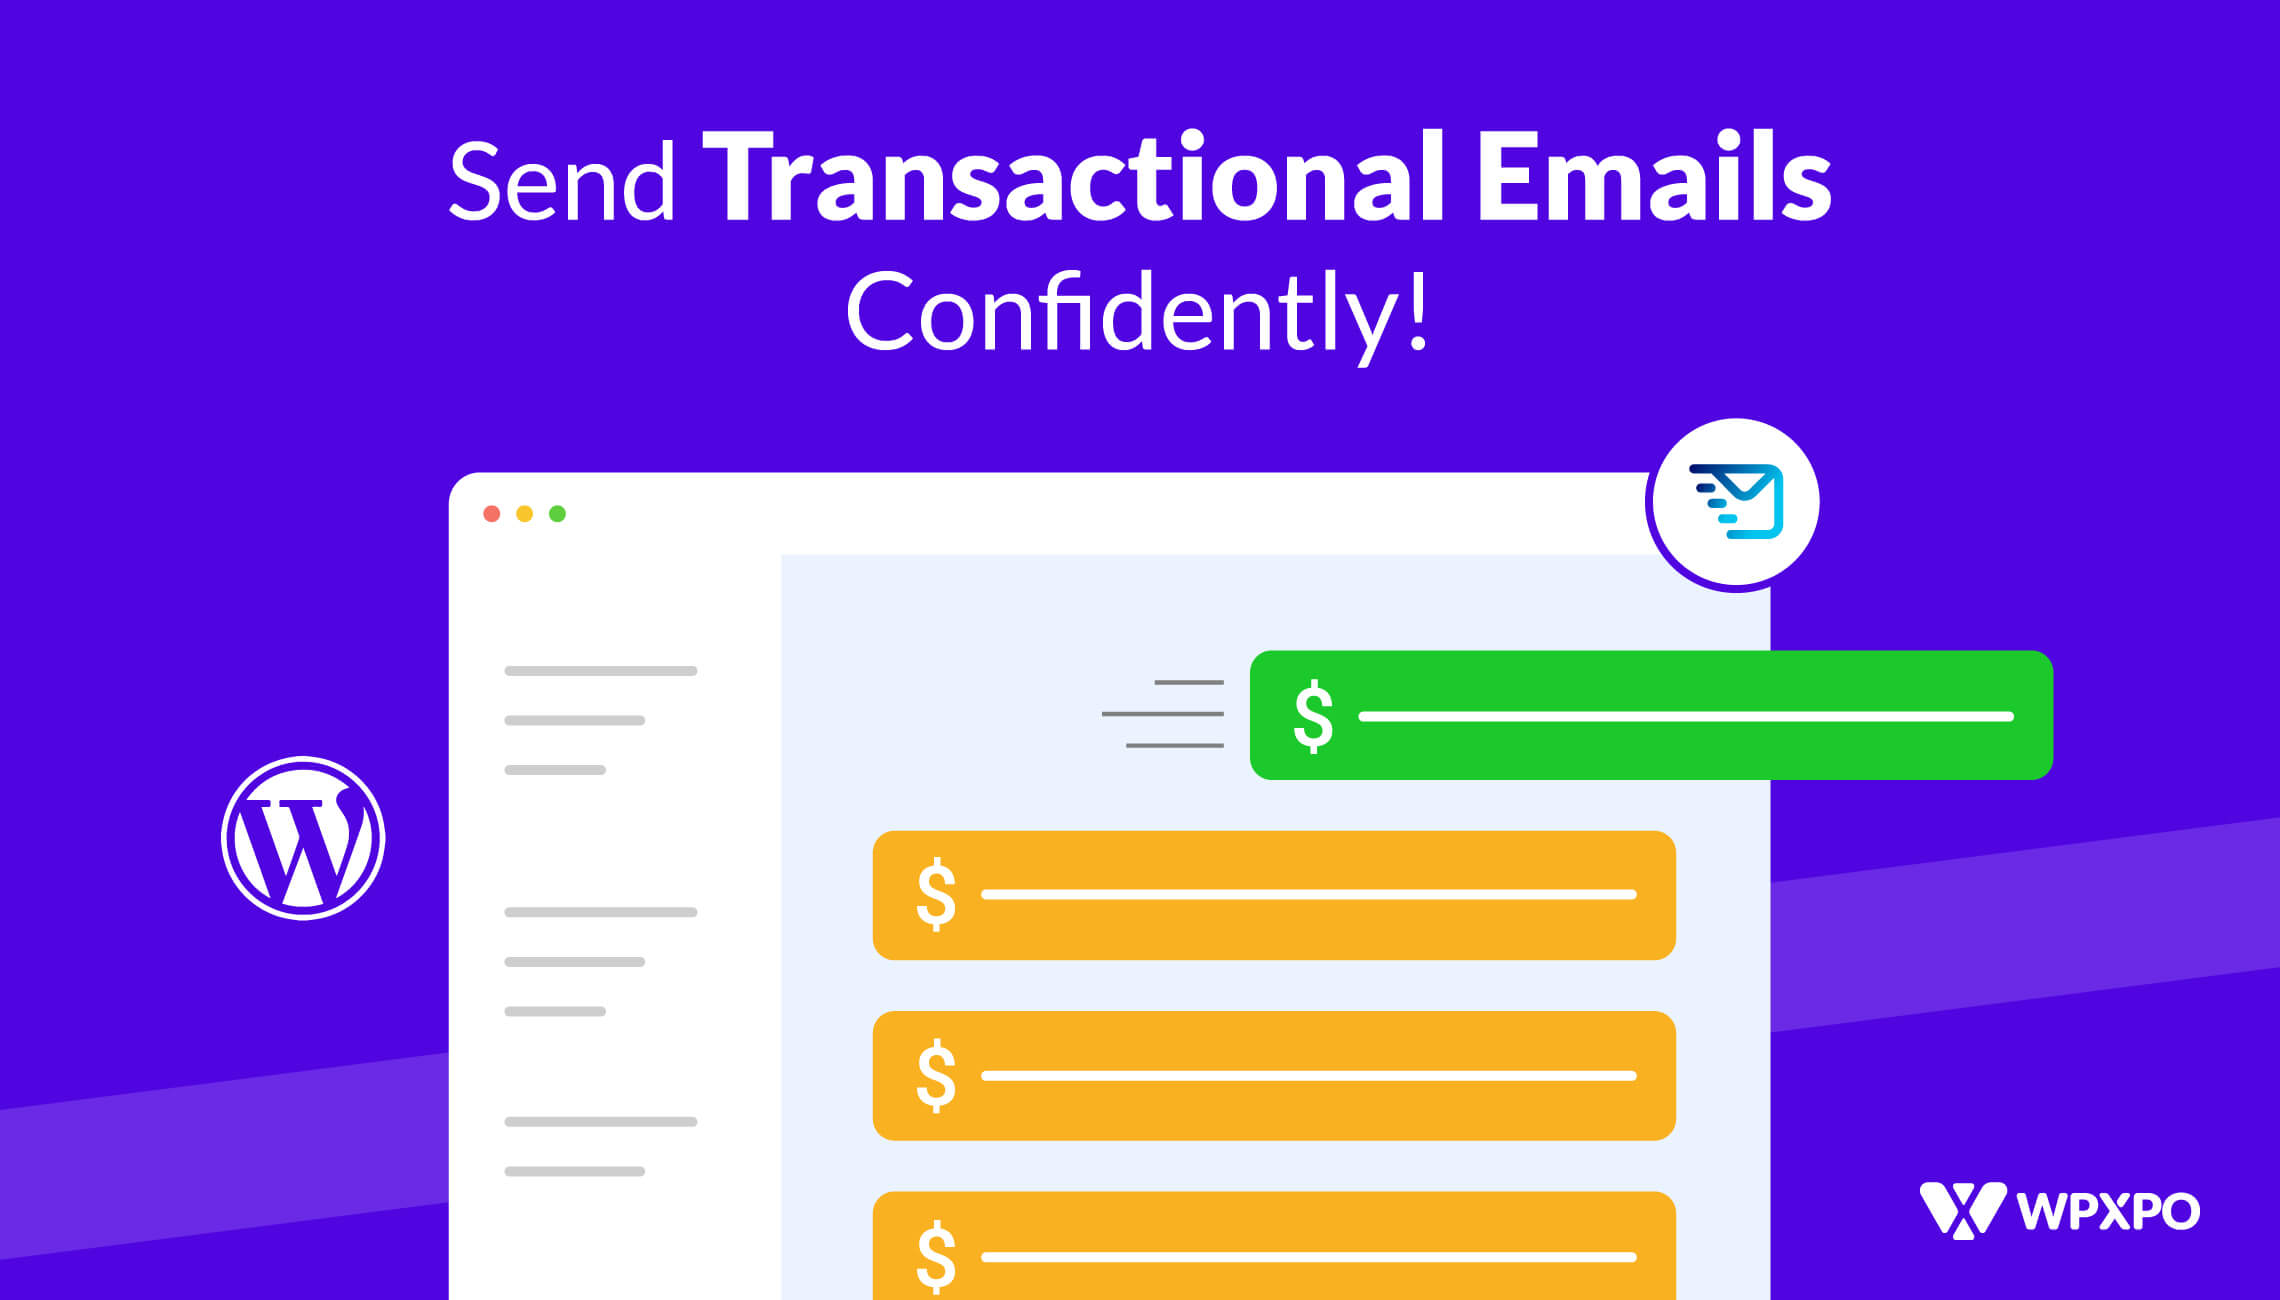 InboxWP-Send Transactional Emails Confidently